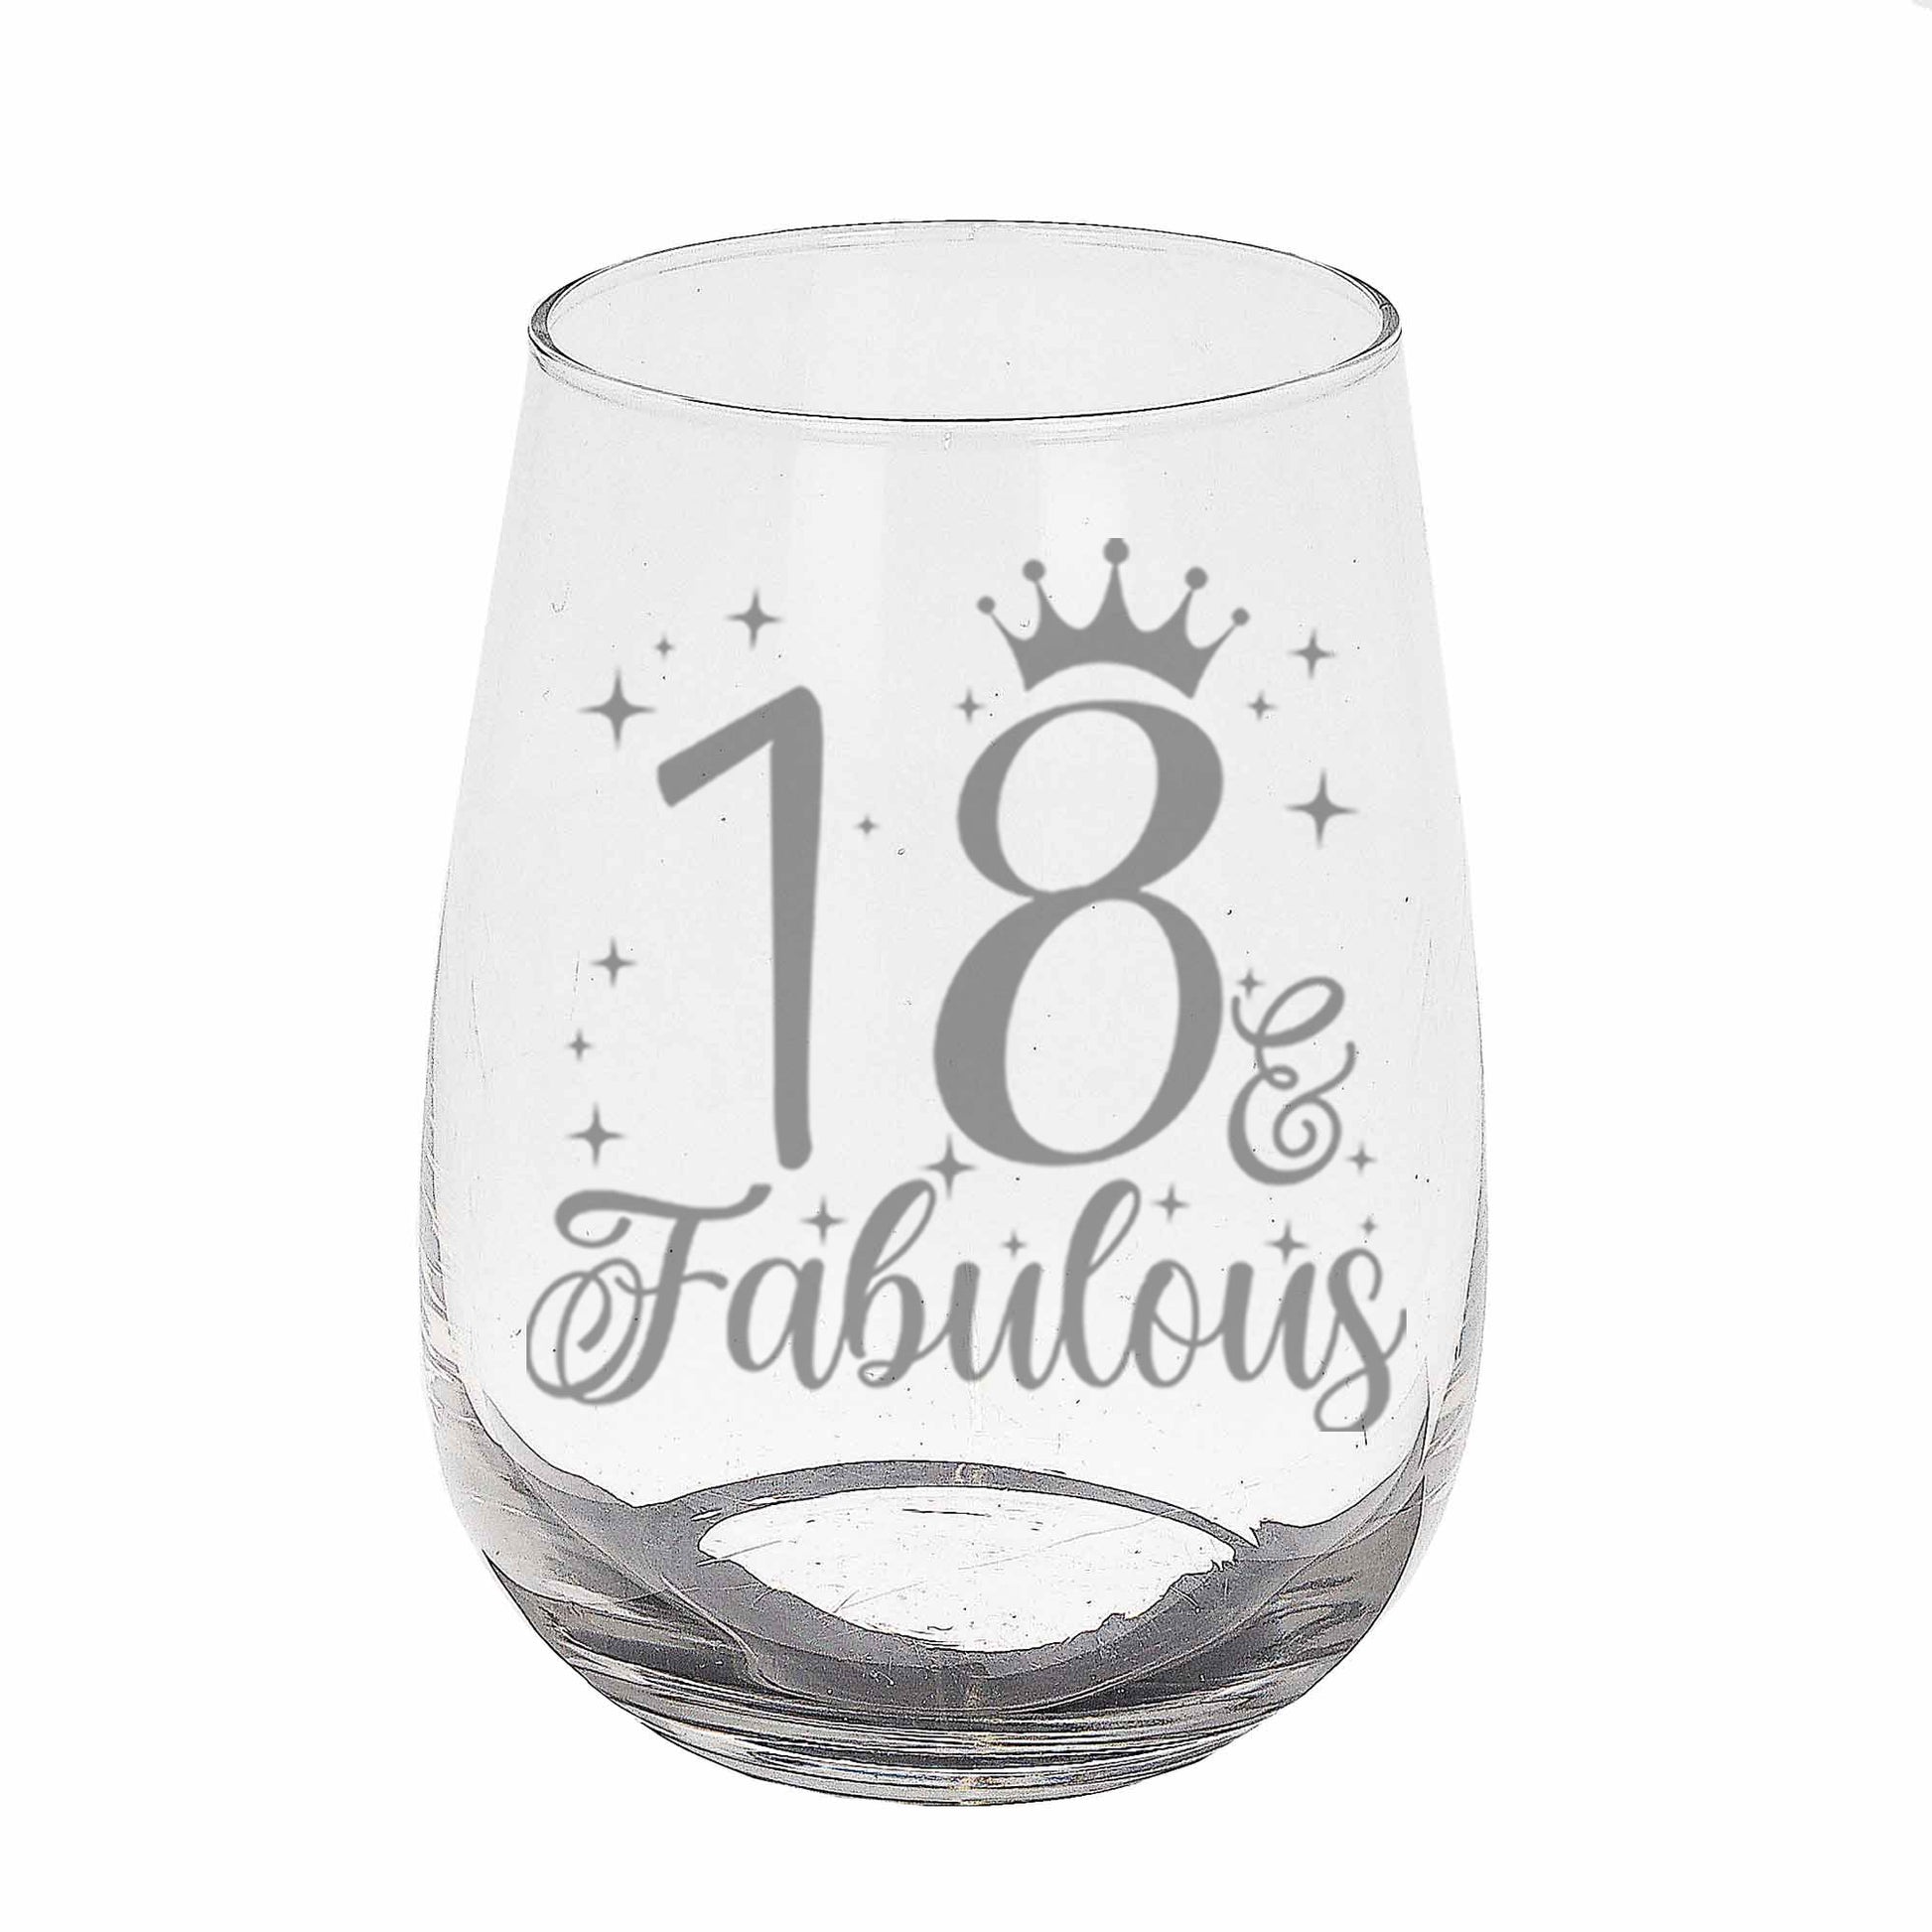 18 & Fabulous Engraved Stemless Gin Glass and/or Coaster Set  - Always Looking Good - Stemless Gin Glass On Its Own  